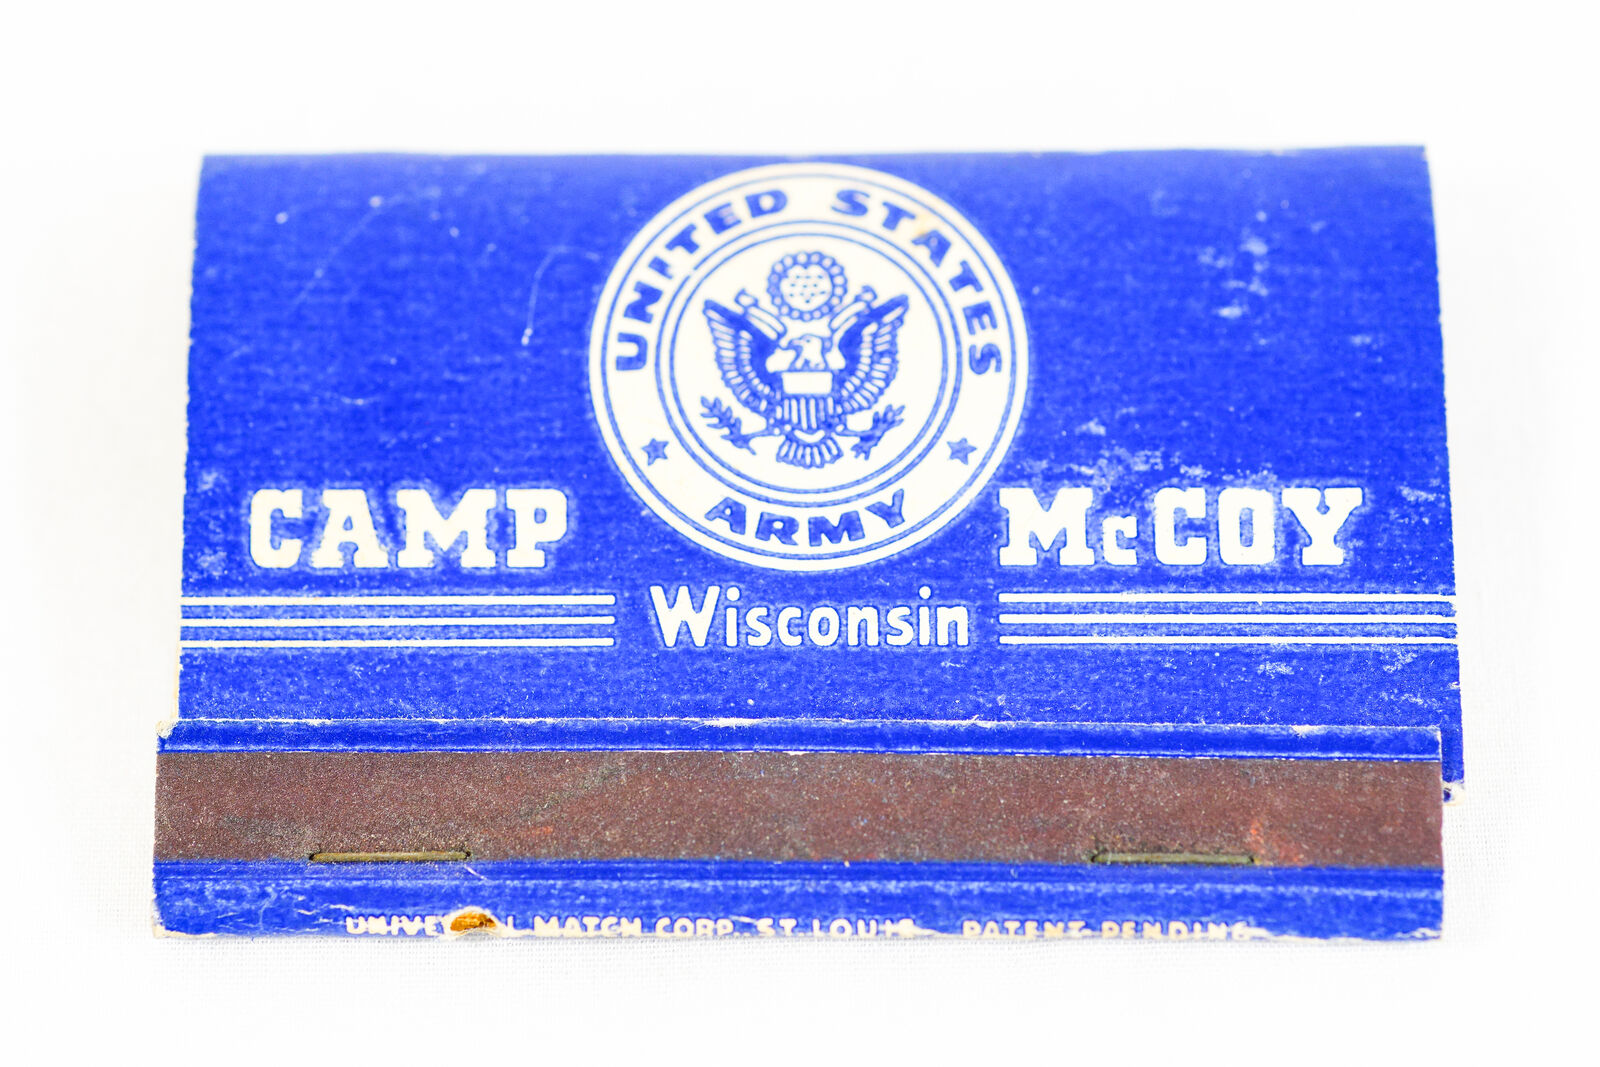 1940s Camp McCoy Wisconsin United States Army UNUSED 40 Strike Matchbook